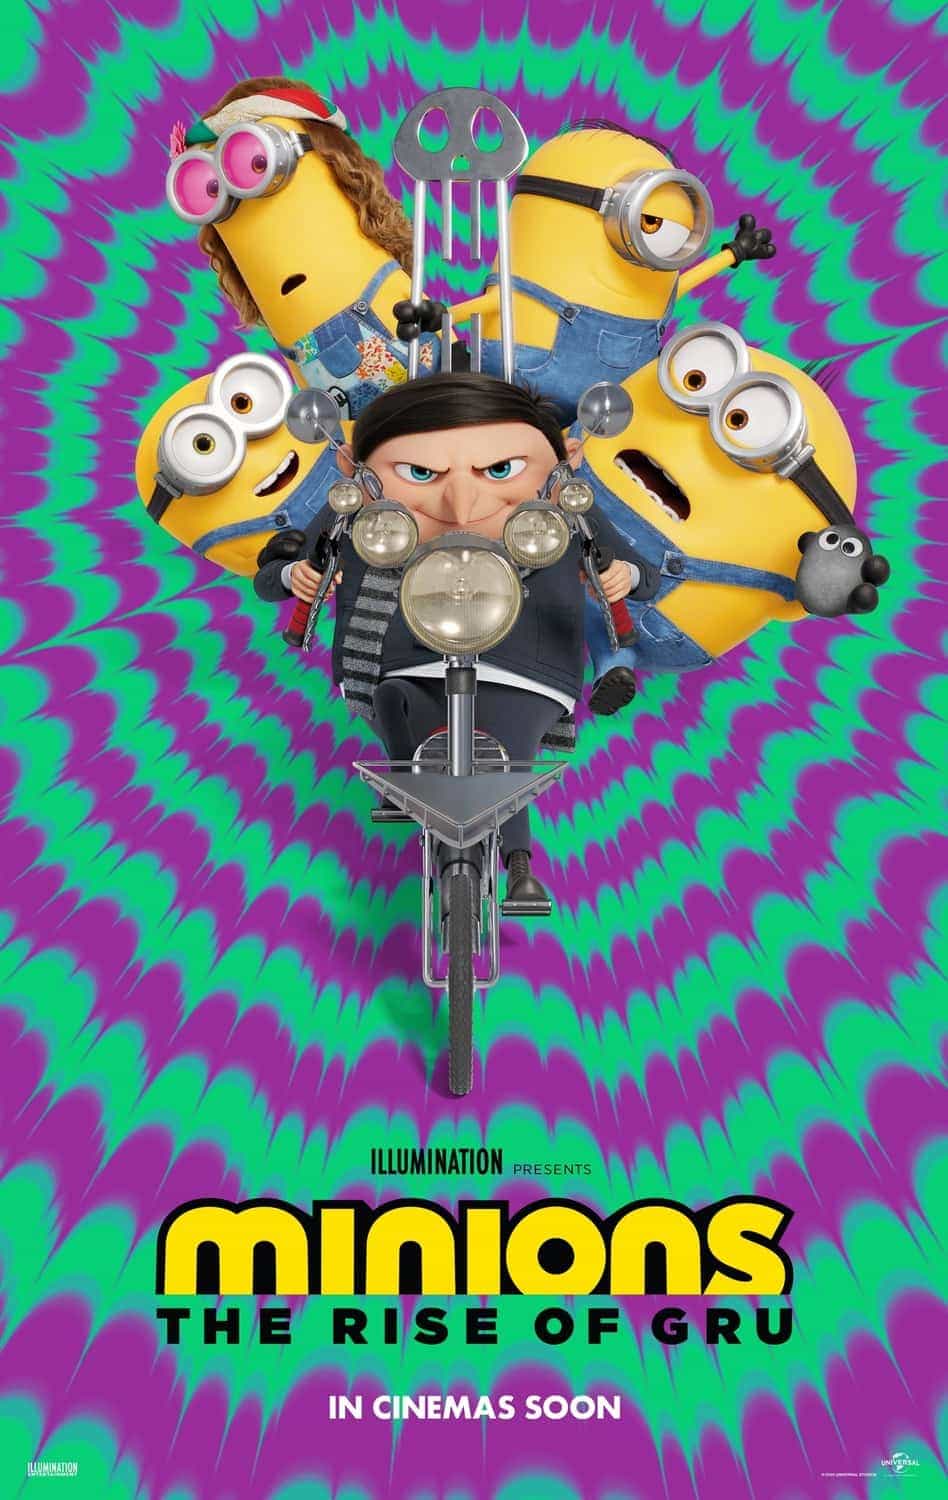 New poster release for Minions: The Rise Of Gru starring Steve Carell - movie release date 2nd July 2021